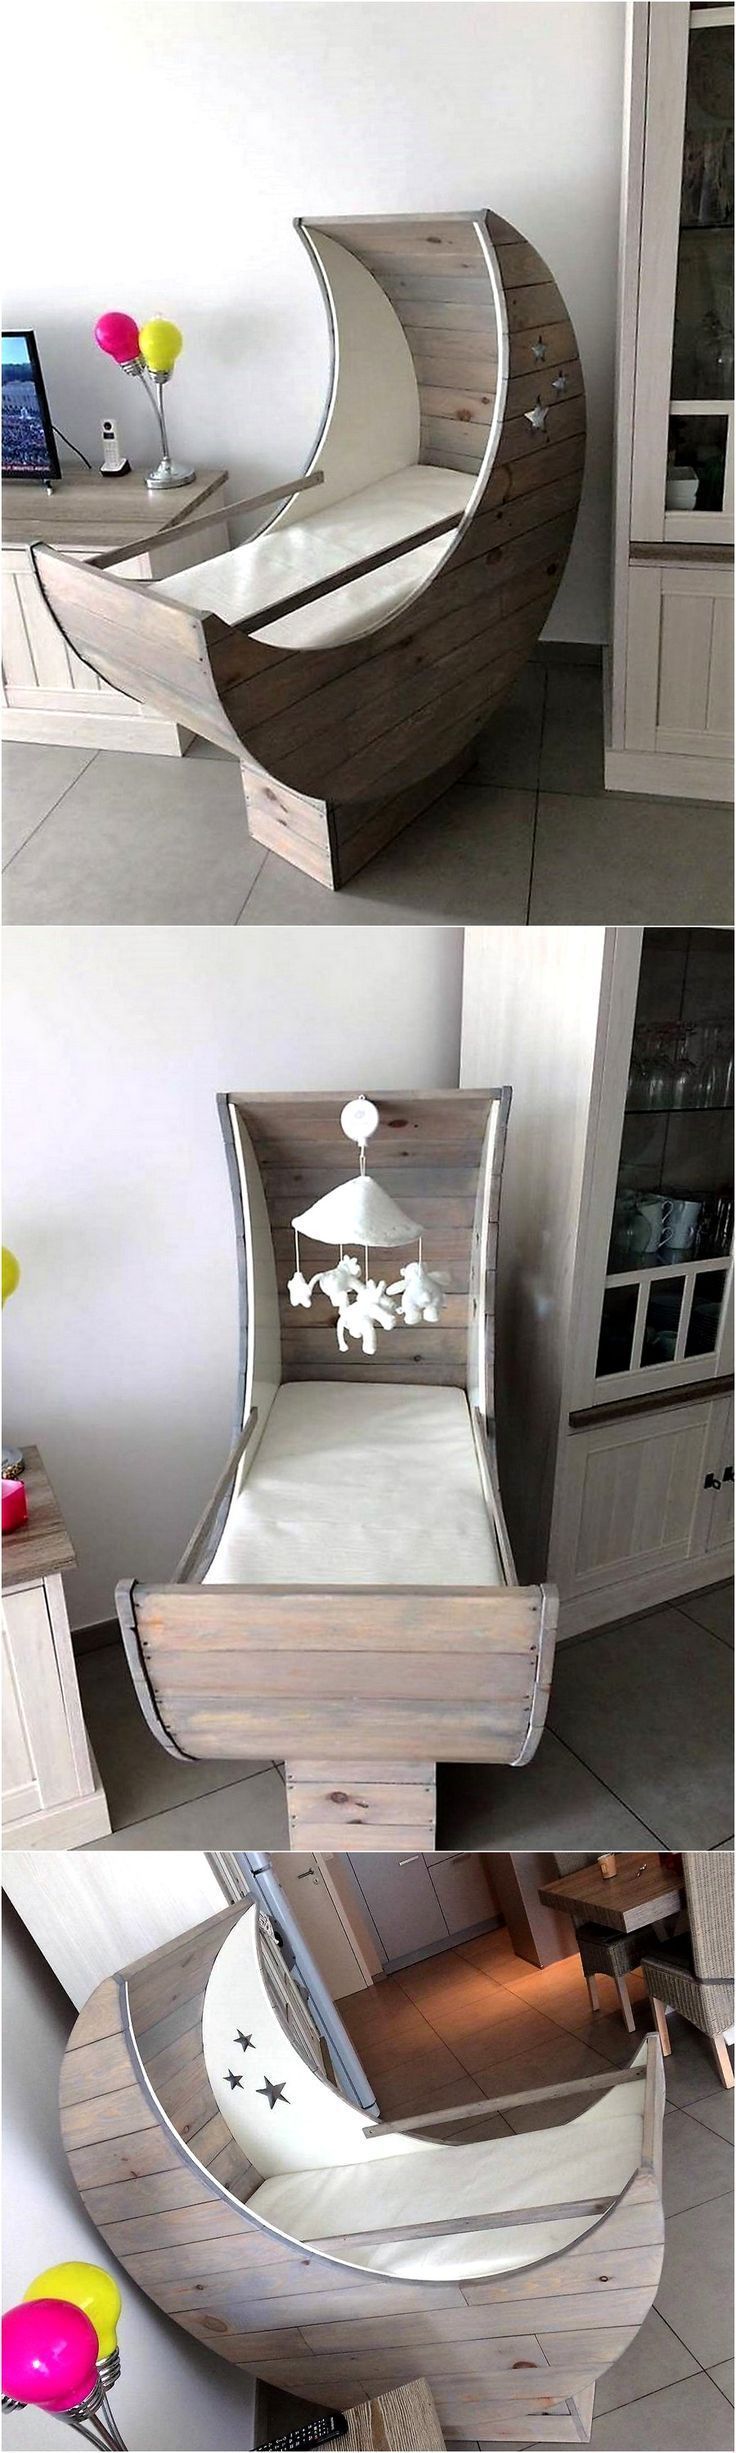 This is a pallet wood made baby cradle half moon. First tell me how about the id...